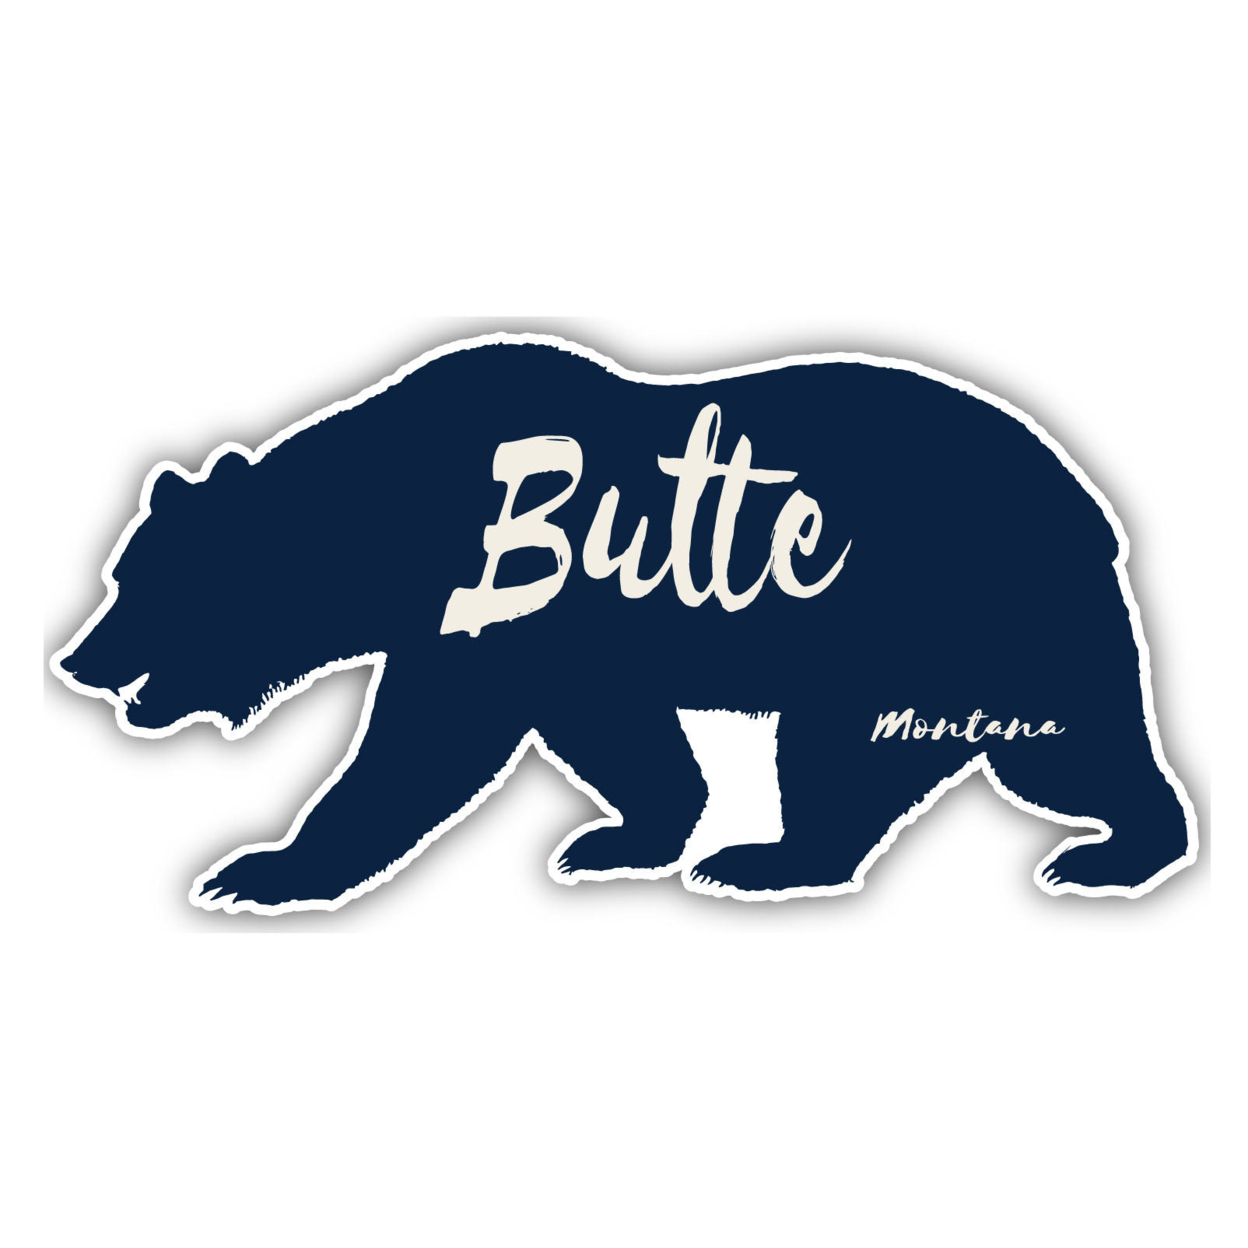 Butte Montana Souvenir Decorative Stickers (Choose Theme And Size) - 4-Pack, 12-Inch, Camp Life